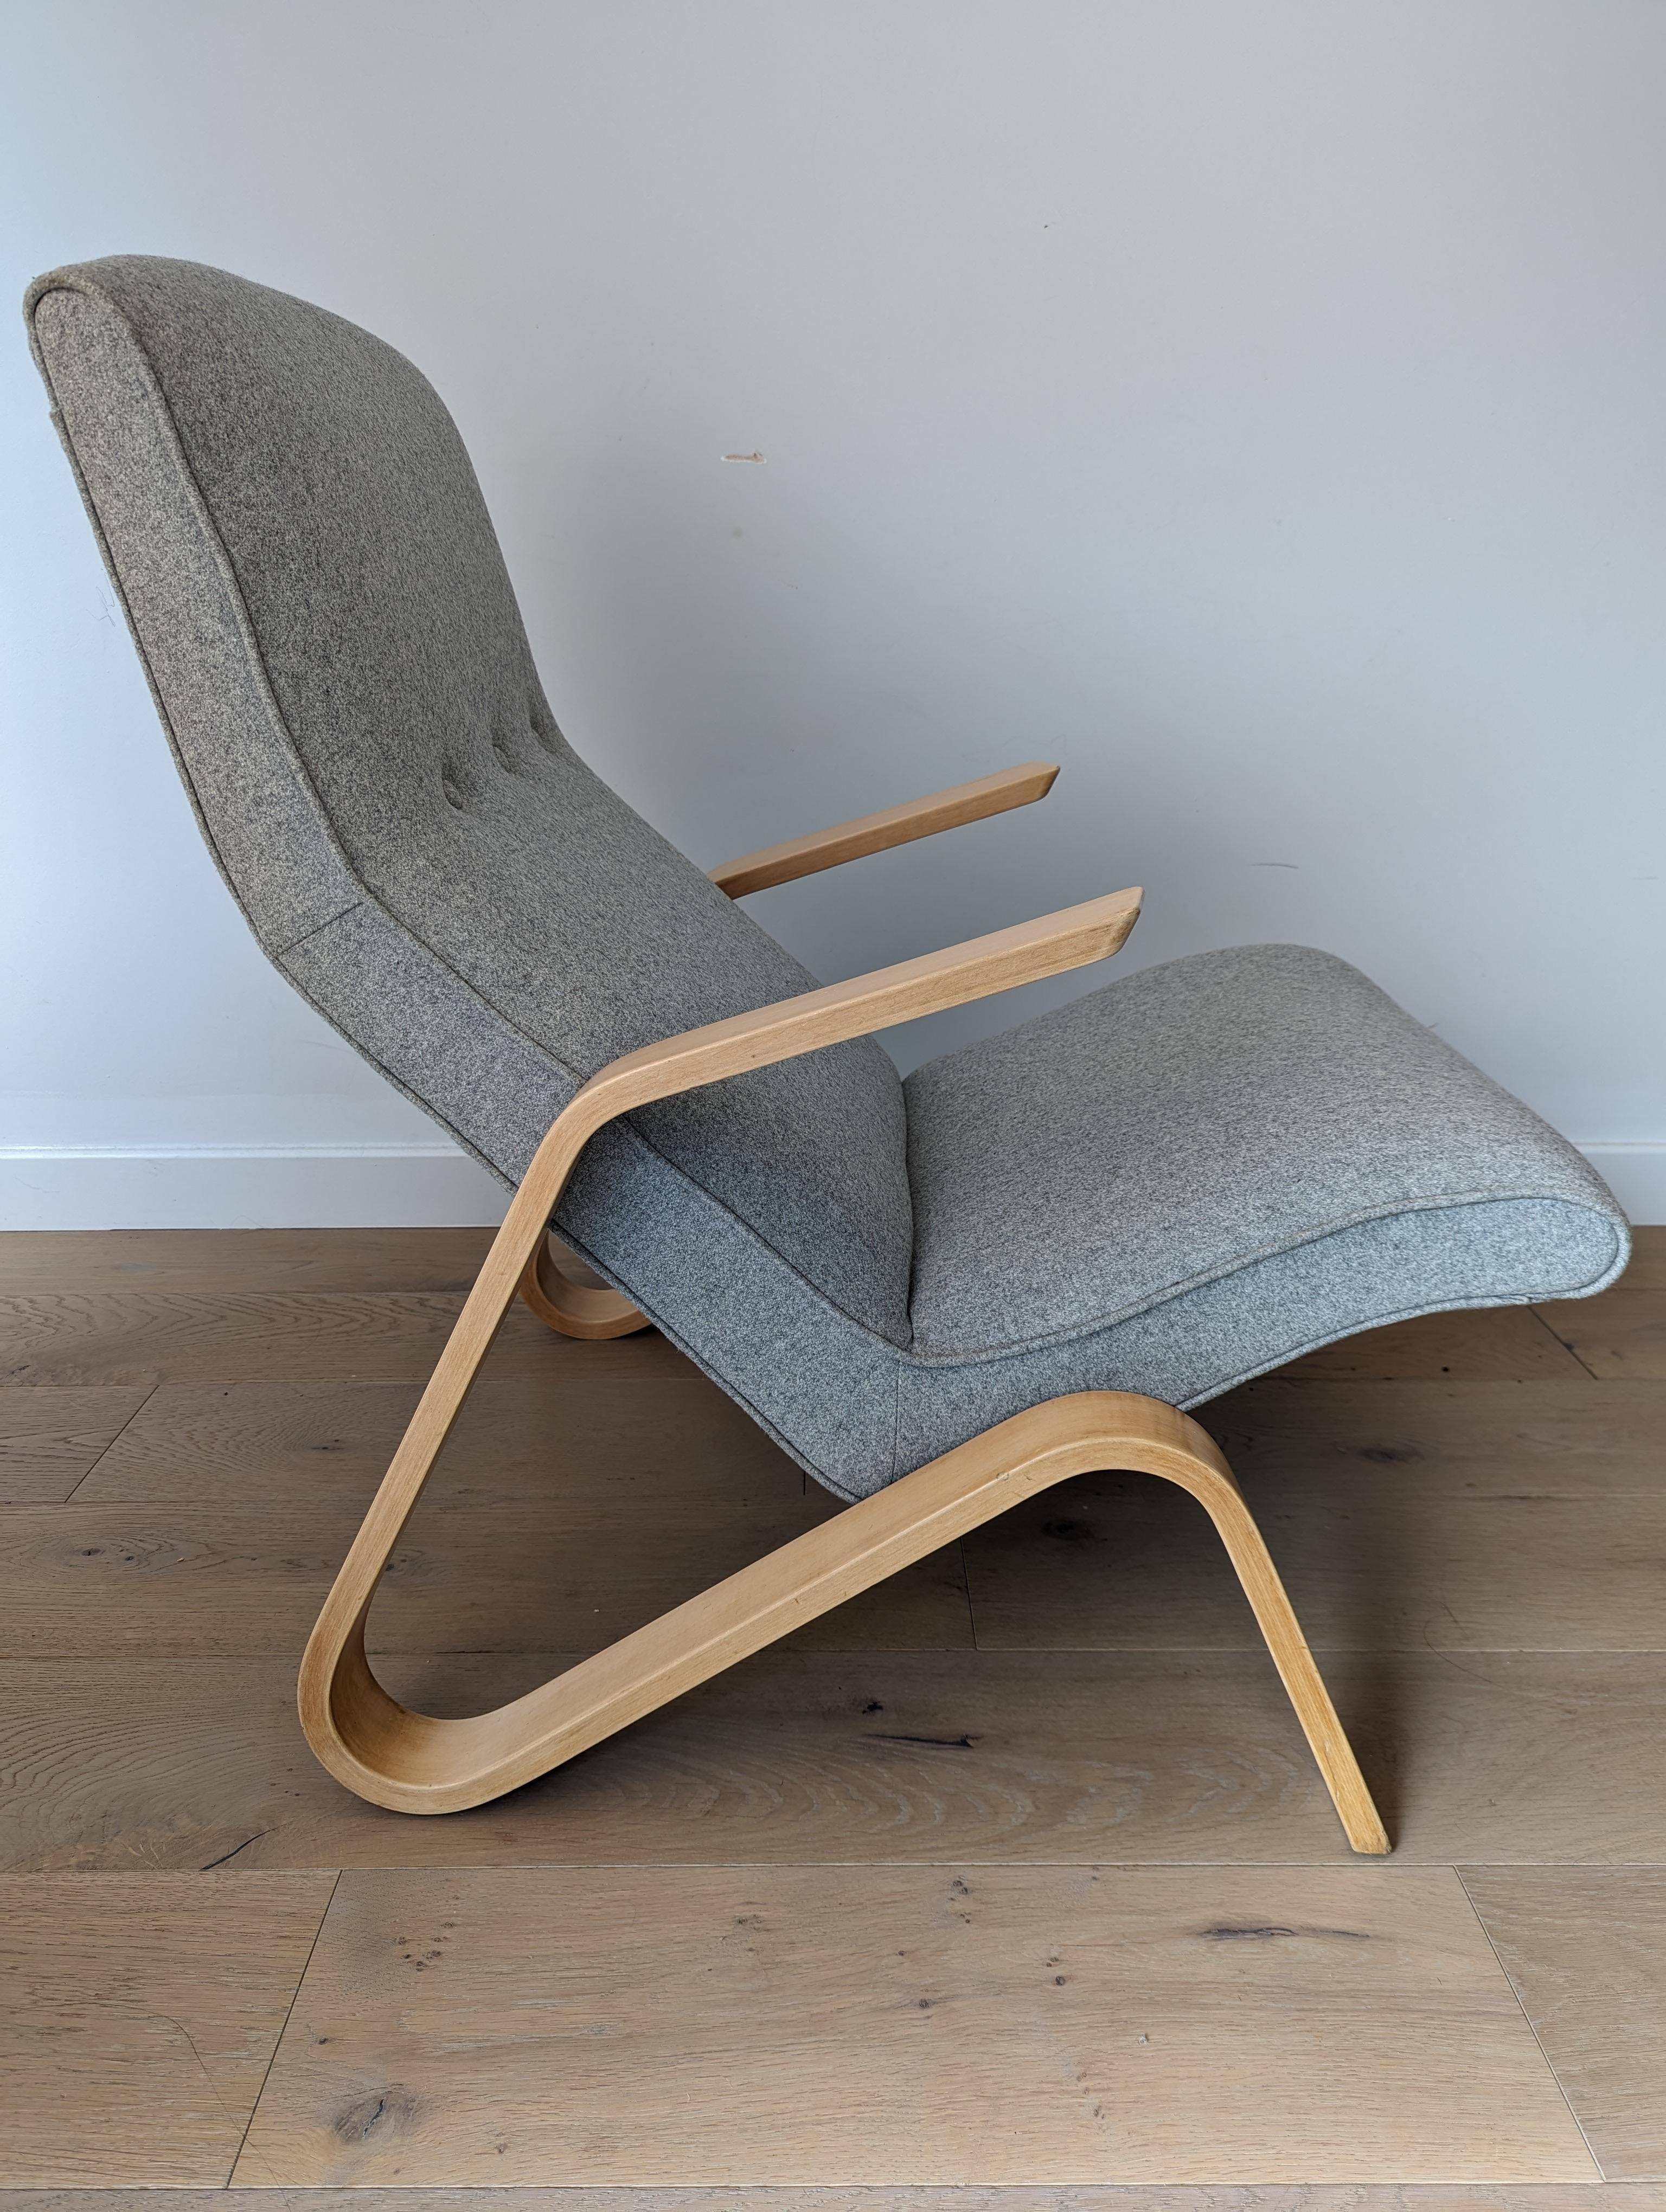 Swiss Mid-century Grasshopper chair by Eero Saarinen for Knoll (1950s) For Sale